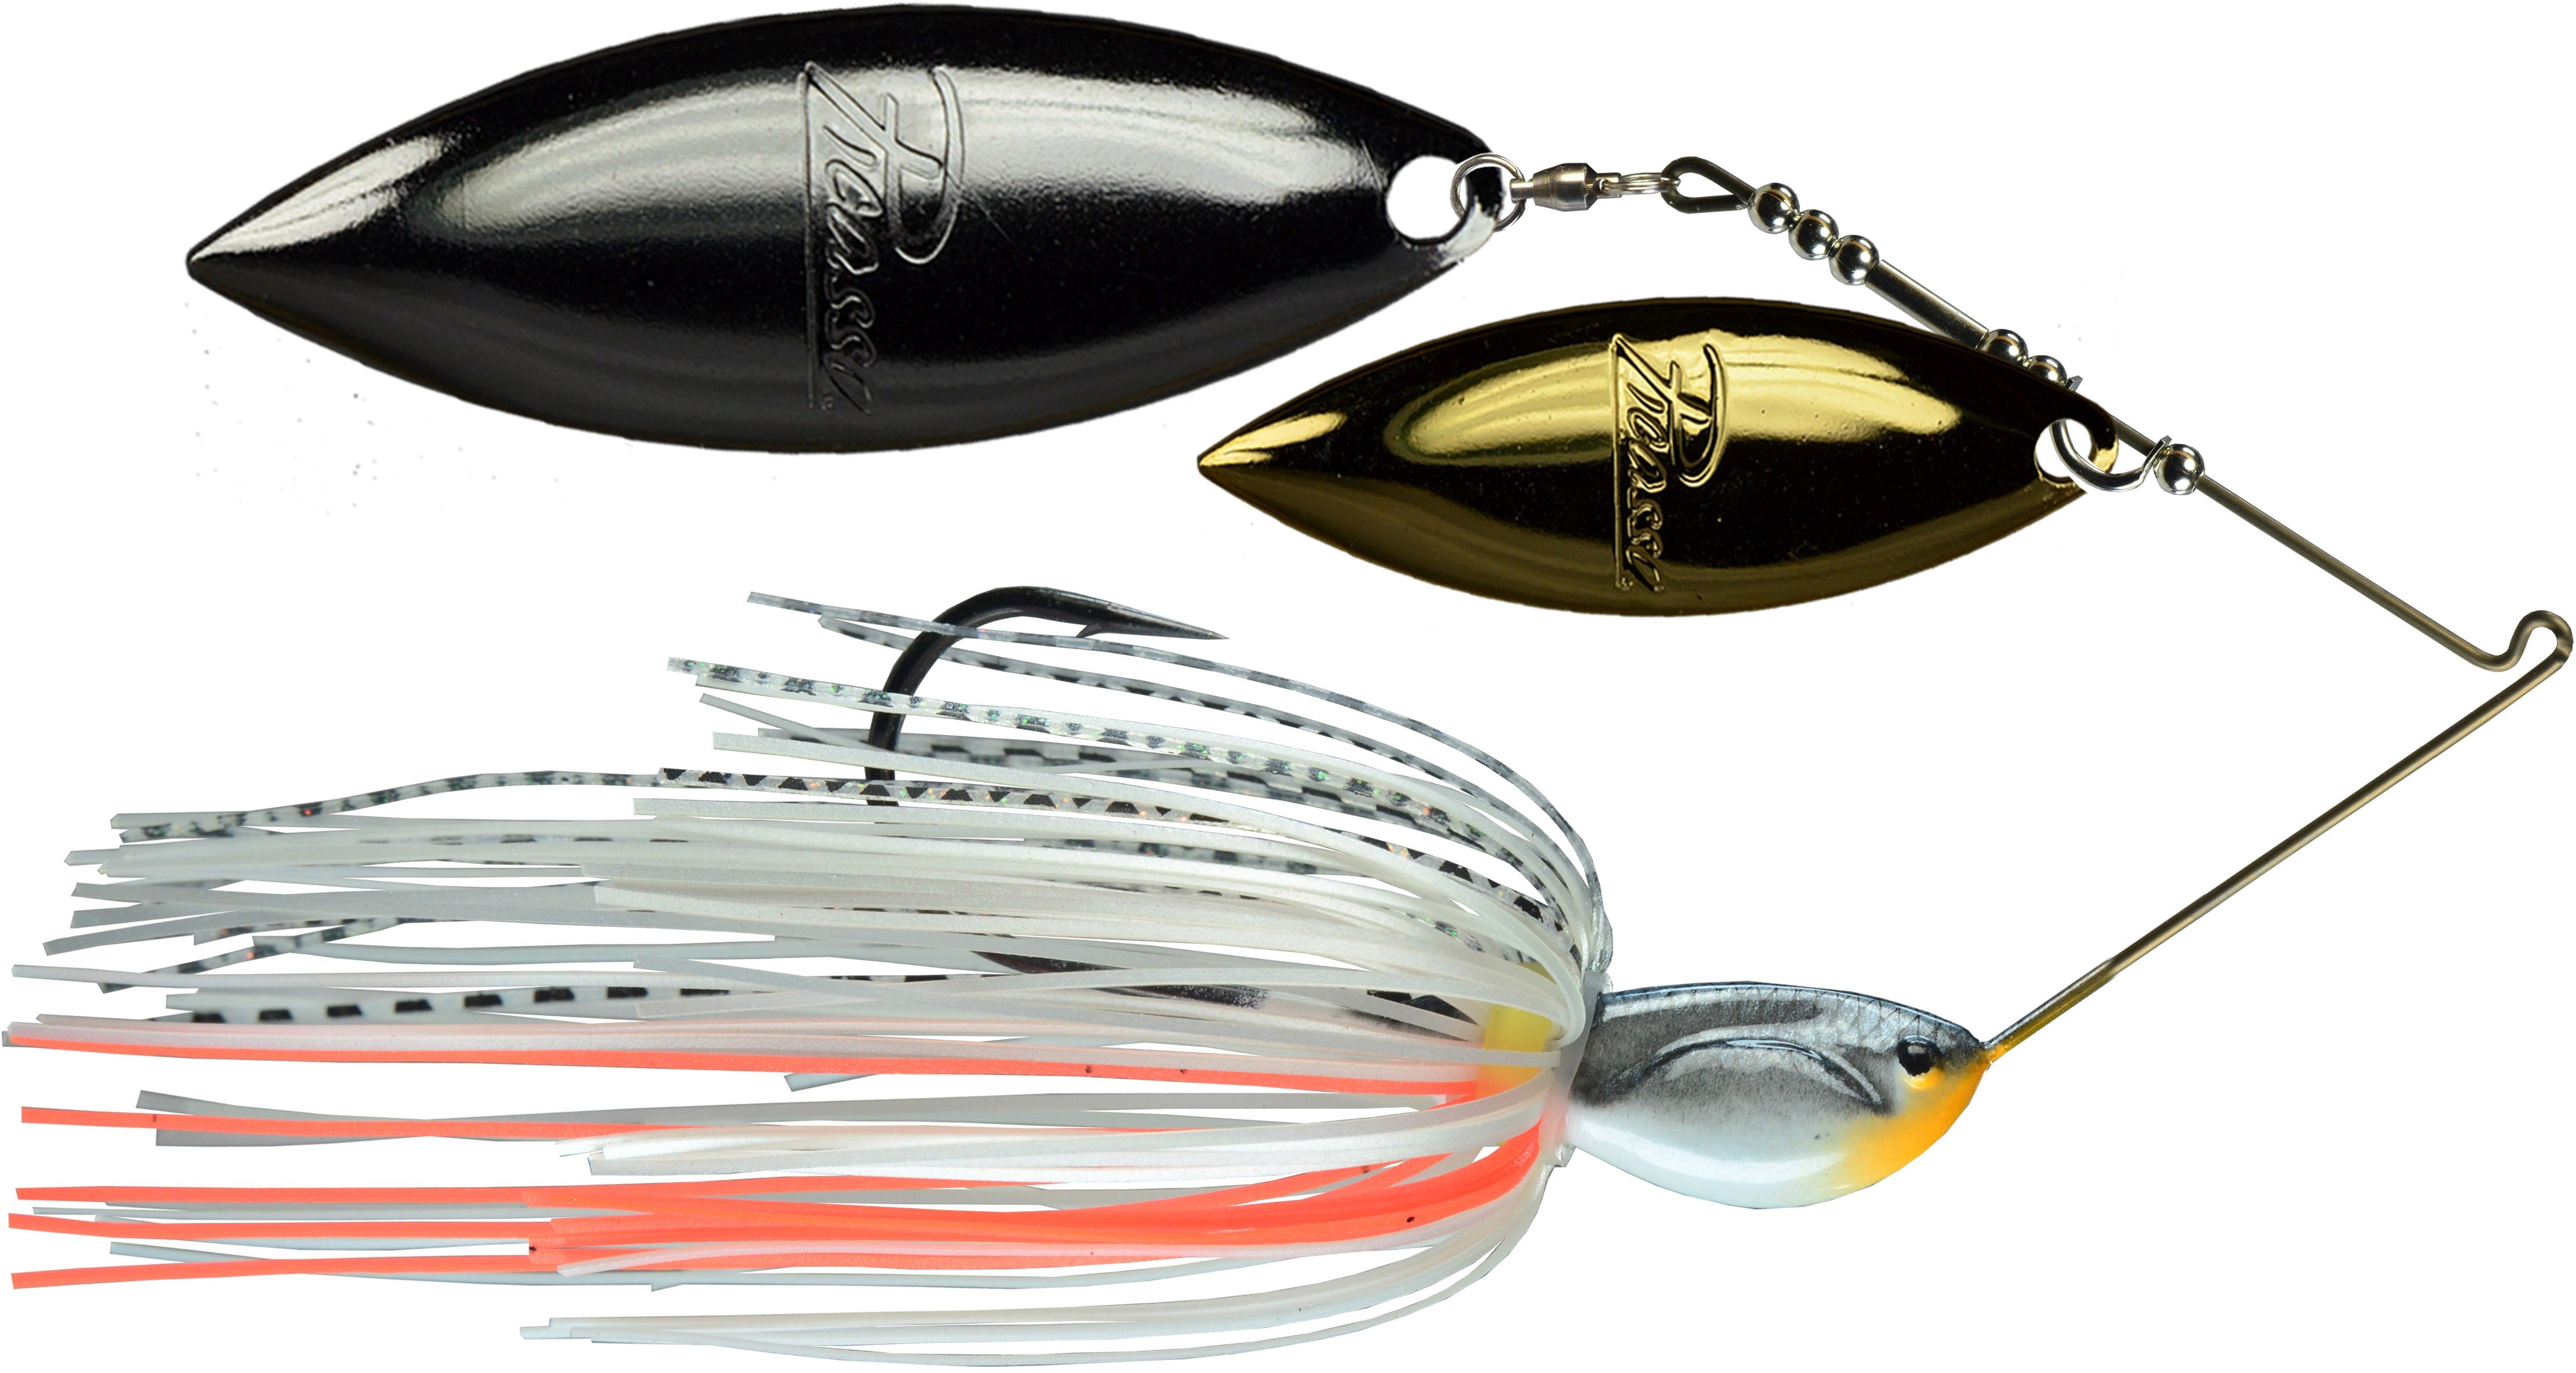 Spinnerbaits, what makes a good one - Wire Baits